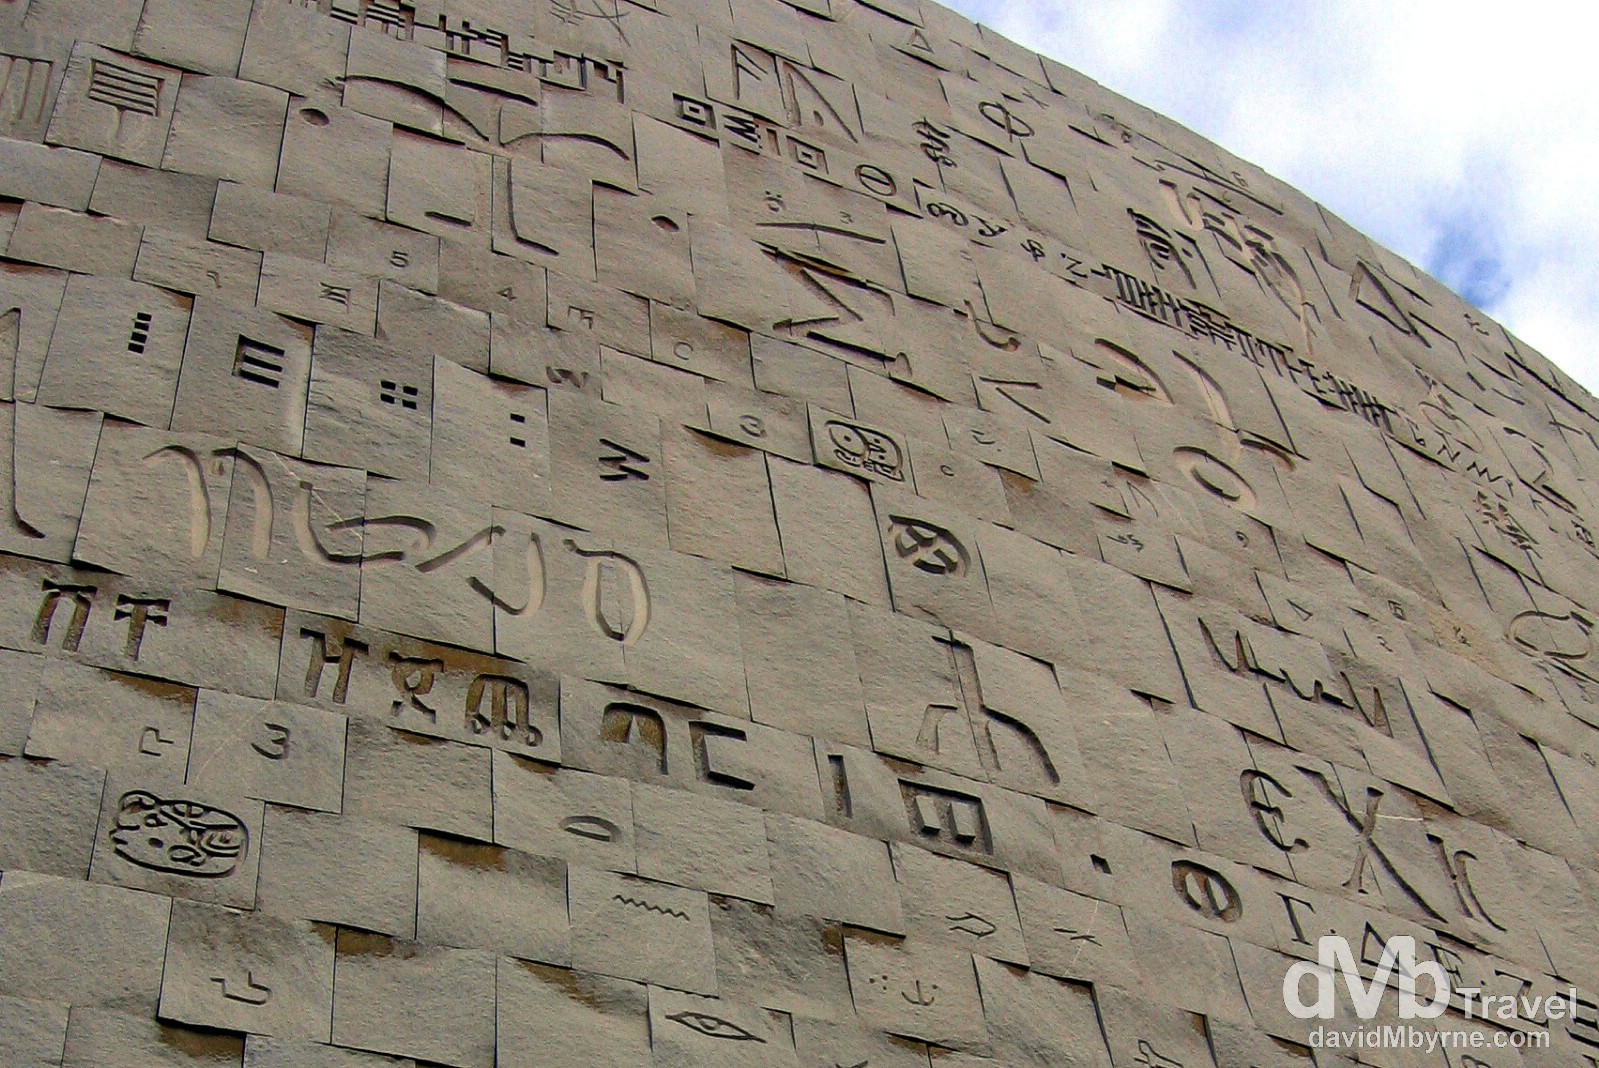 Giant letters, pictograms, hieroglyphs and symbols from every known alphabet on the outer walls of the Bibliotheca Alexandrina, Alexandria, Egypt. April 16, 2008.